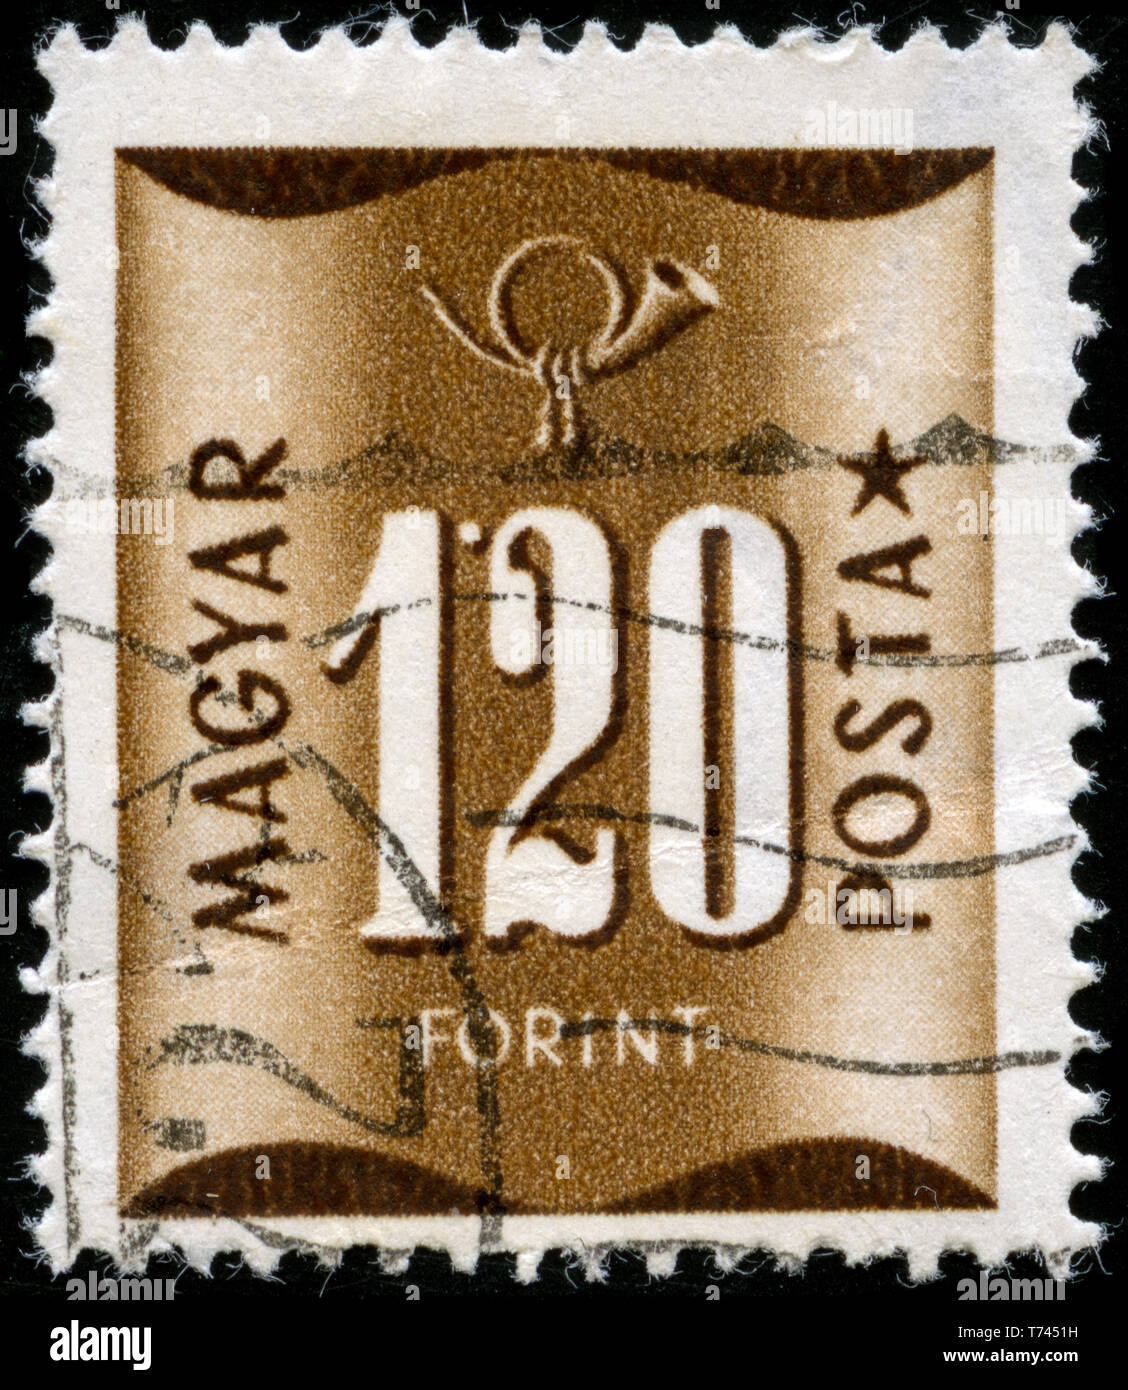 Postage stamp from Hungary in the Postage due series issued in 1951 Stock Photo